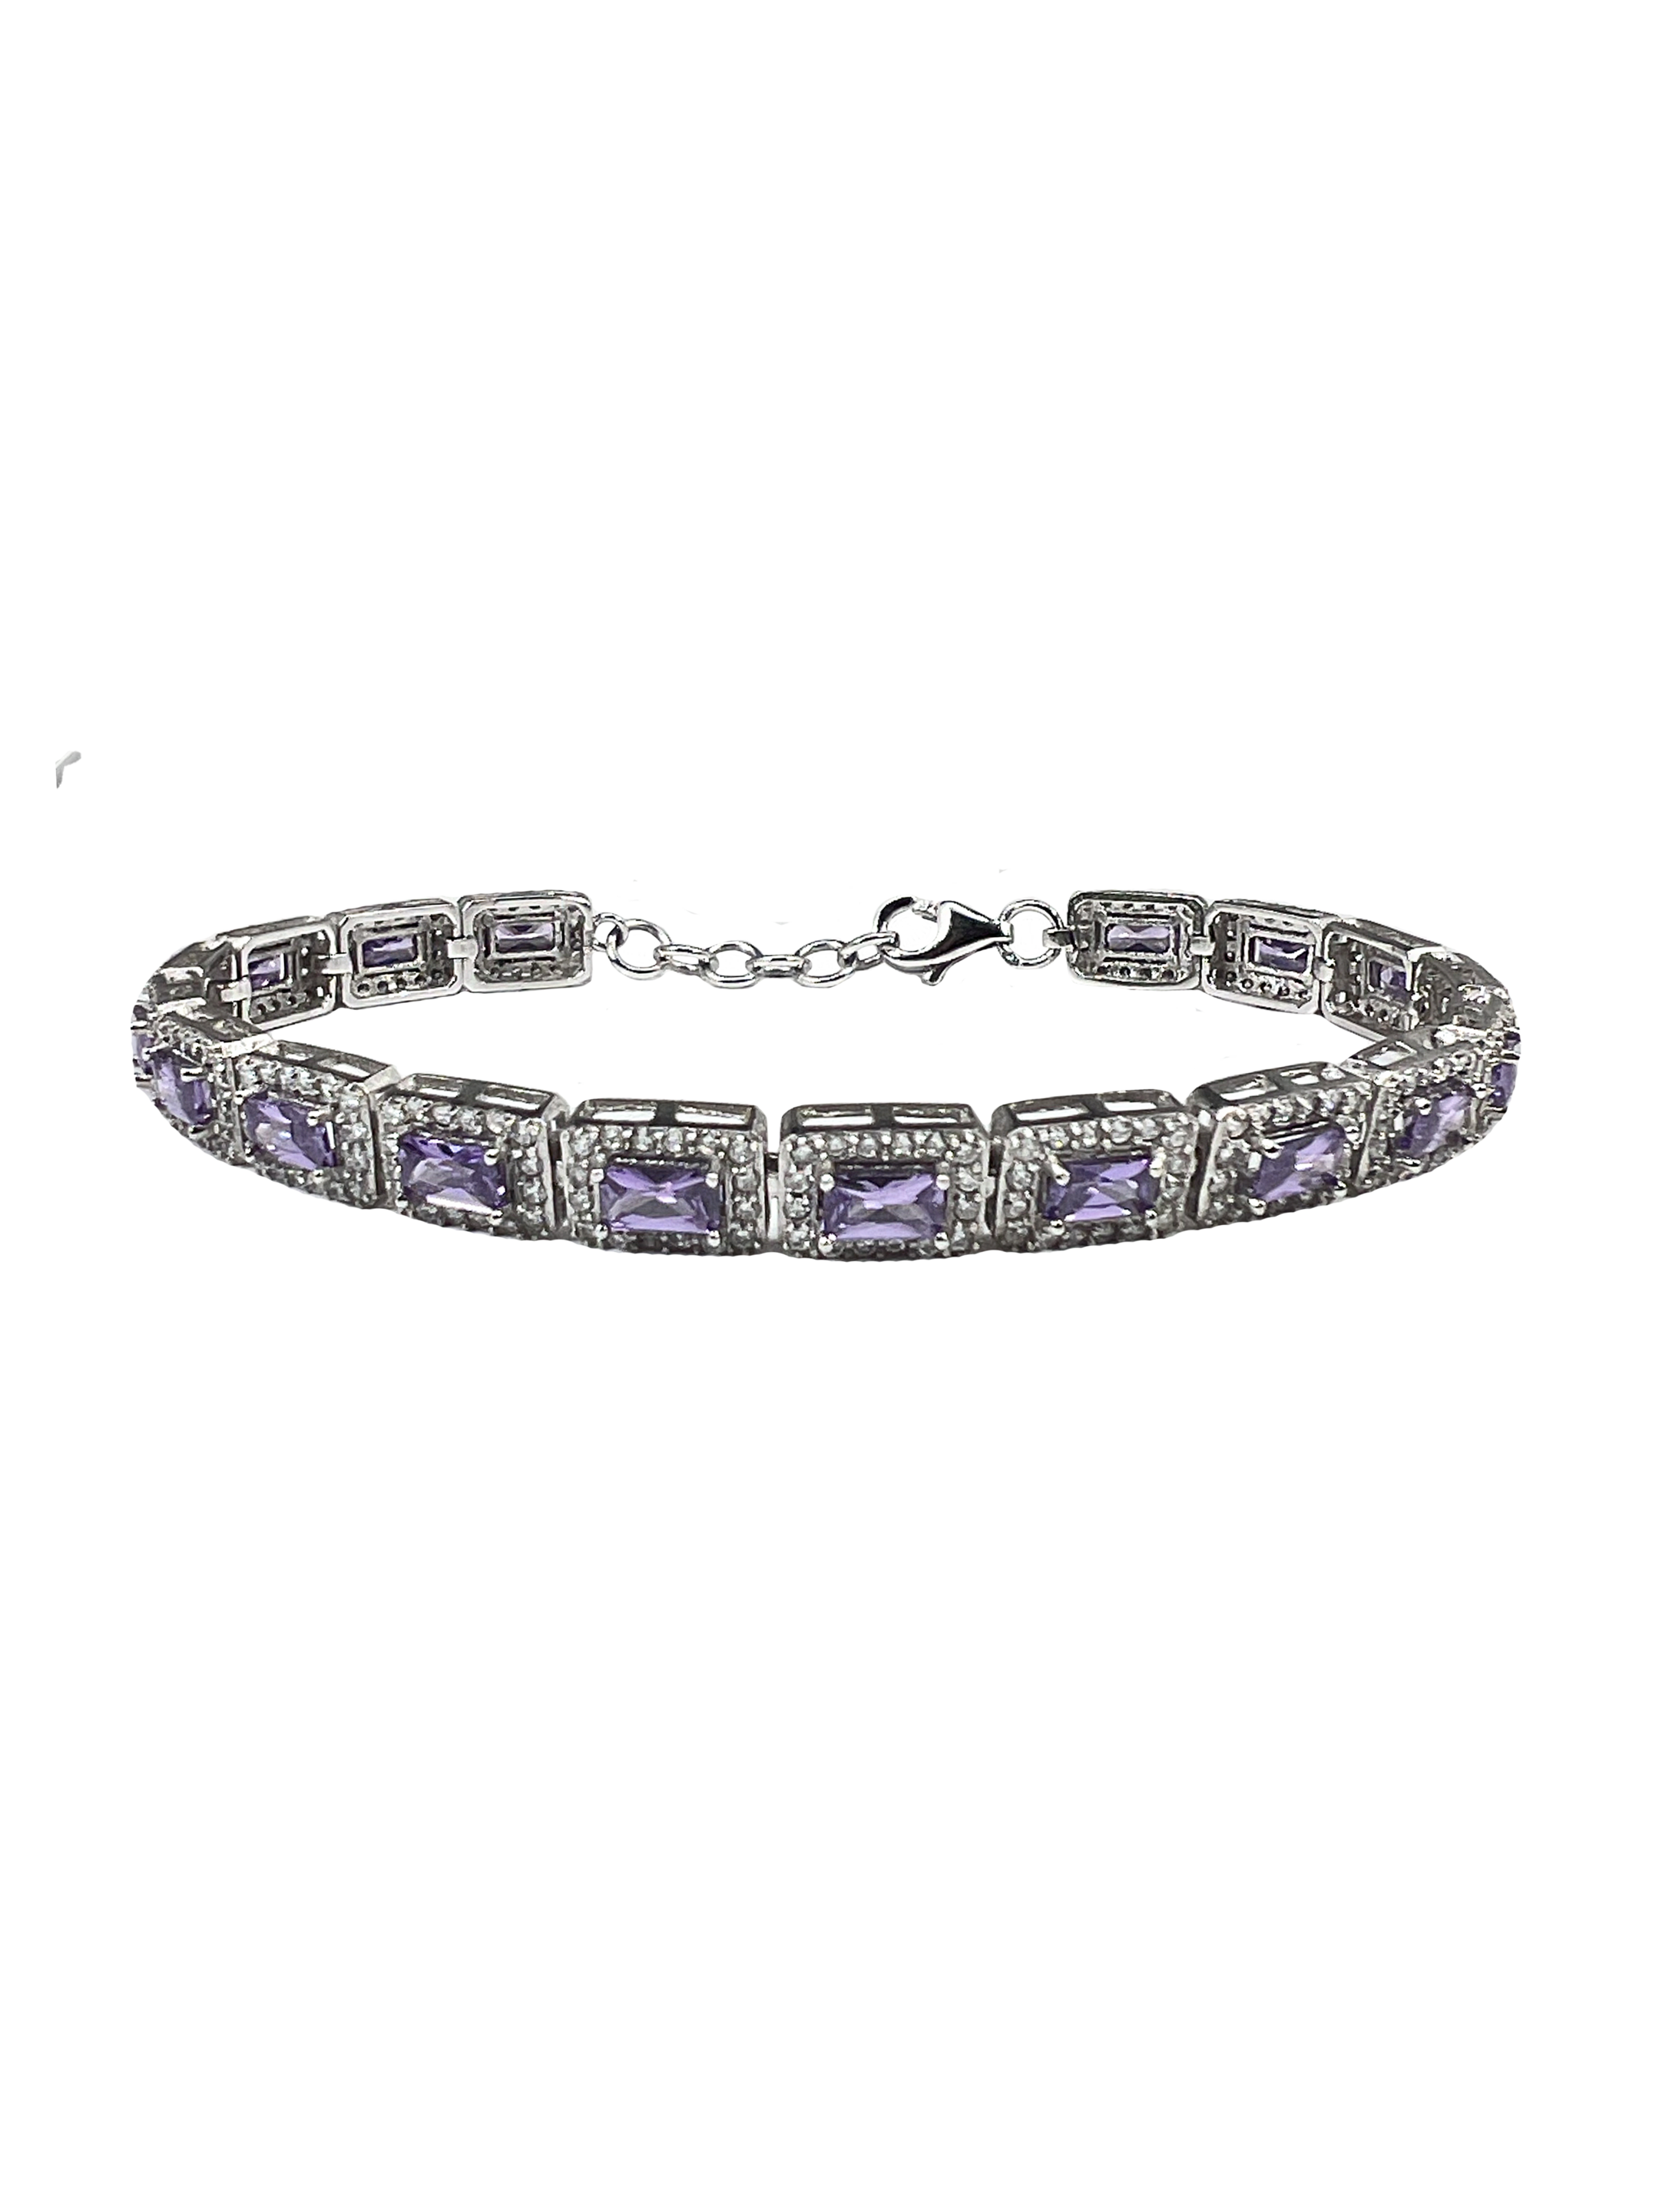 Silver bracelet with purple crystals